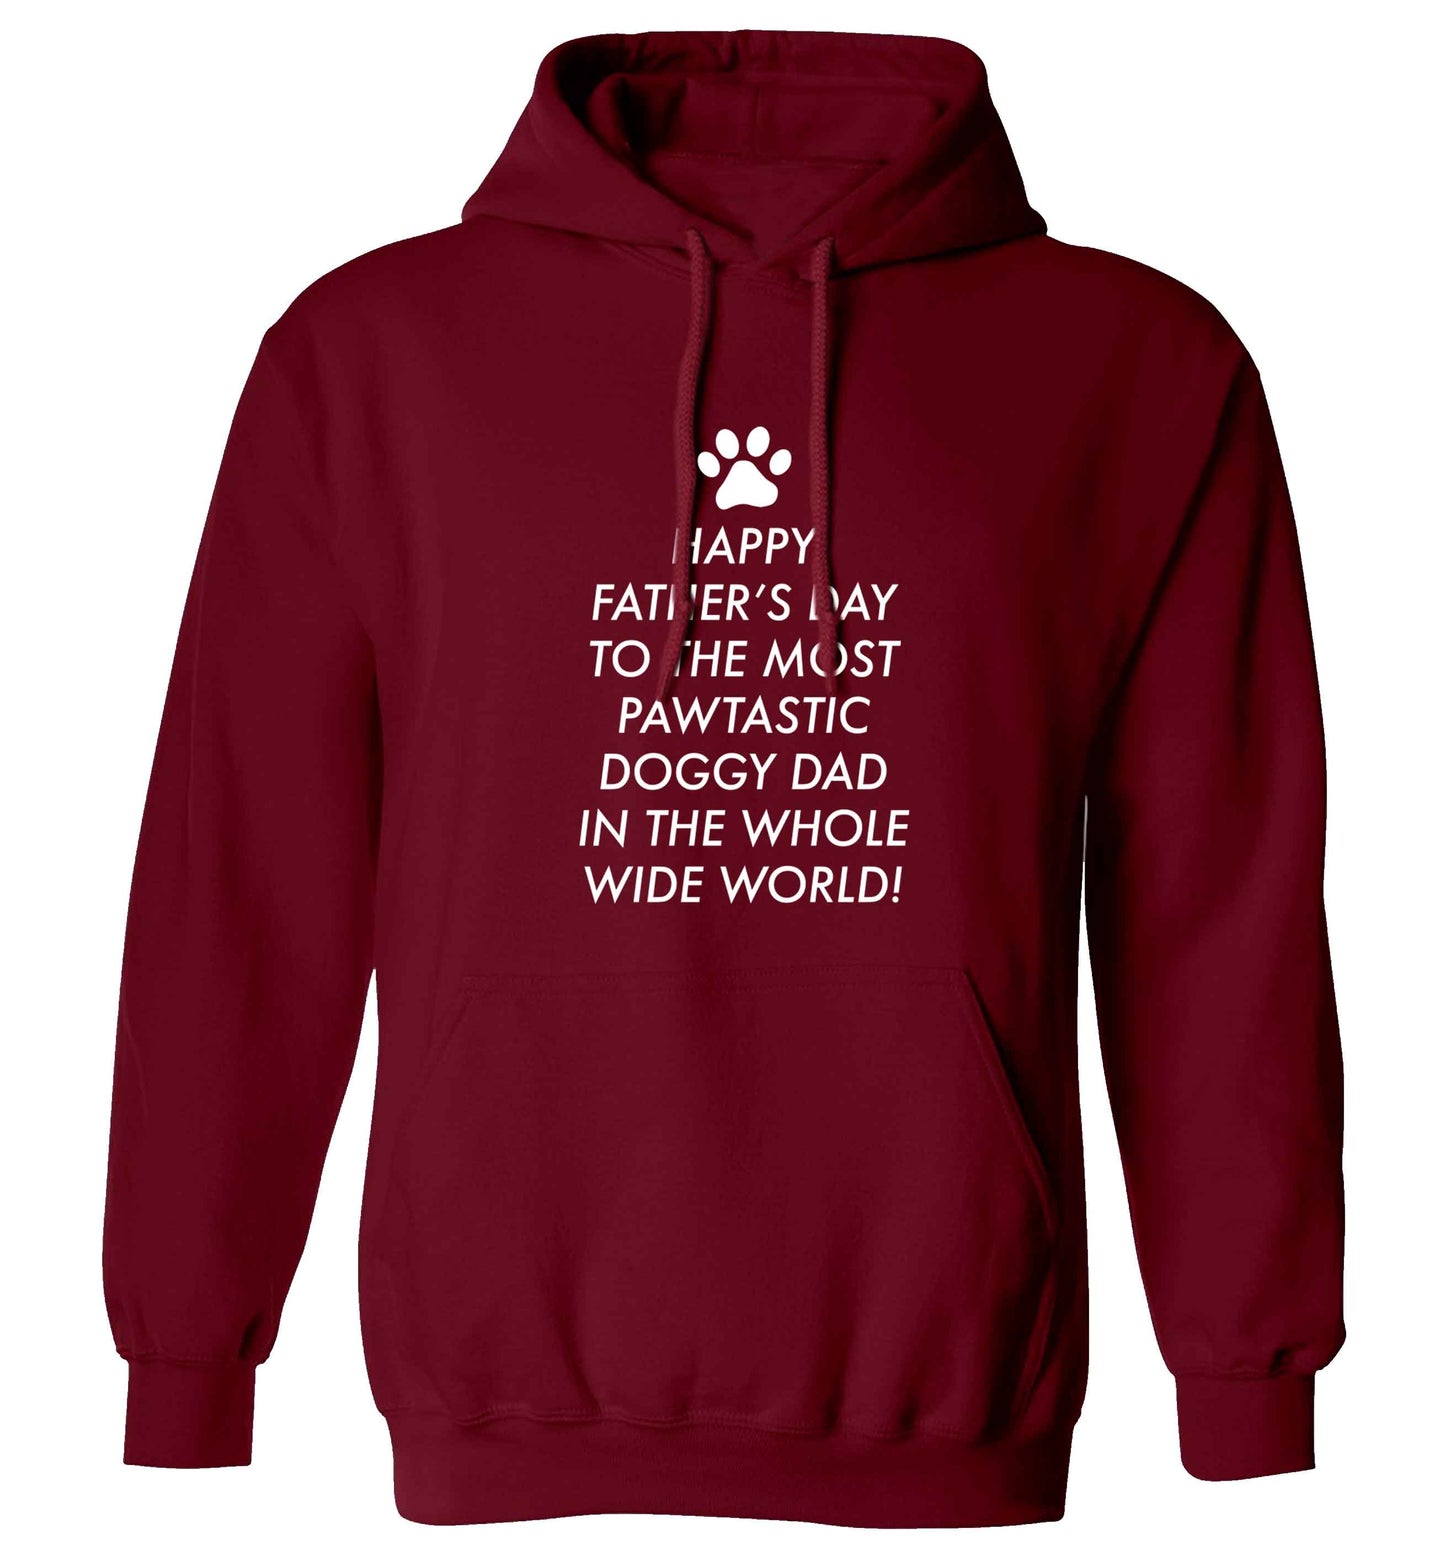 Happy Father's day to the most pawtastic doggy dad in the whole wide world!adults unisex maroon hoodie 2XL